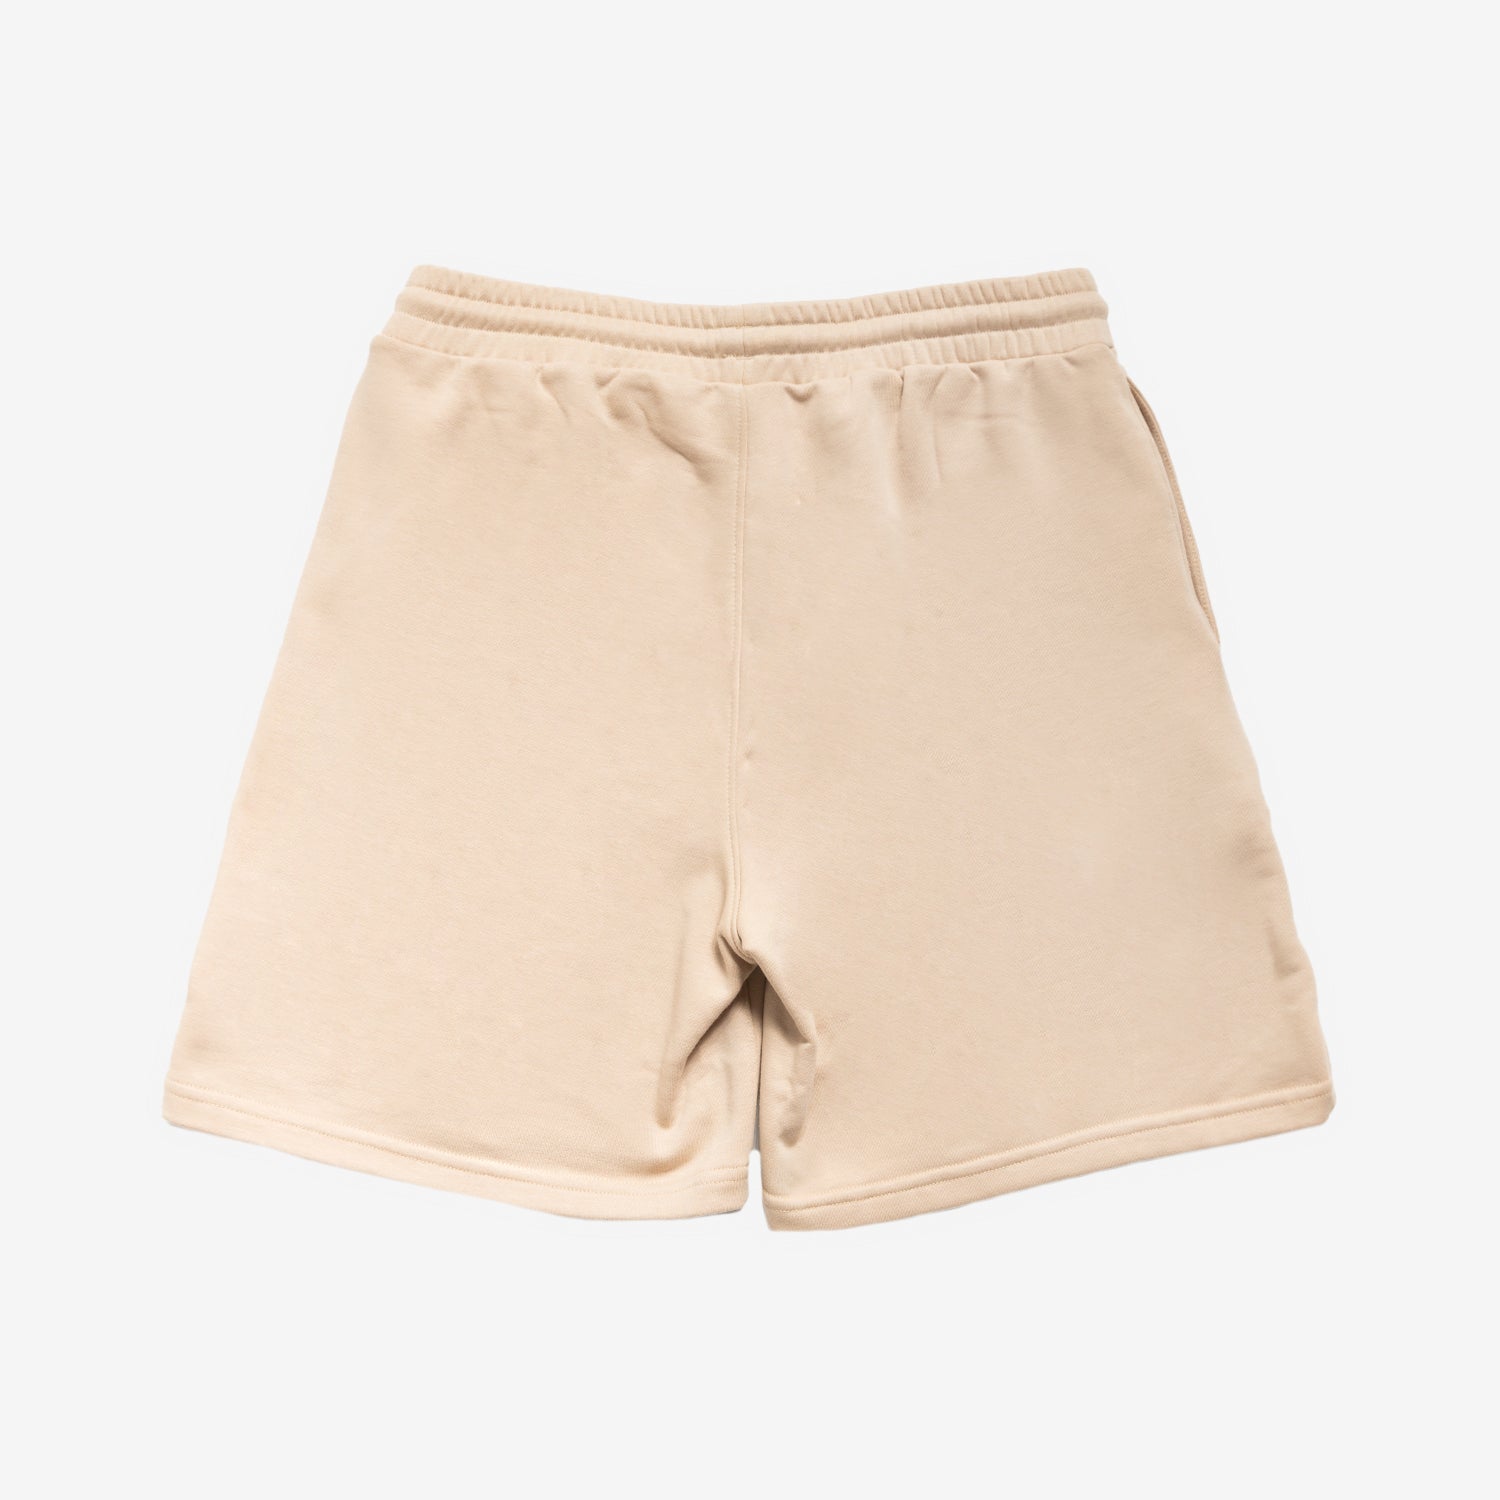 Vechter Wear 'UrbanEase' Casual Short Sand - Core Collection